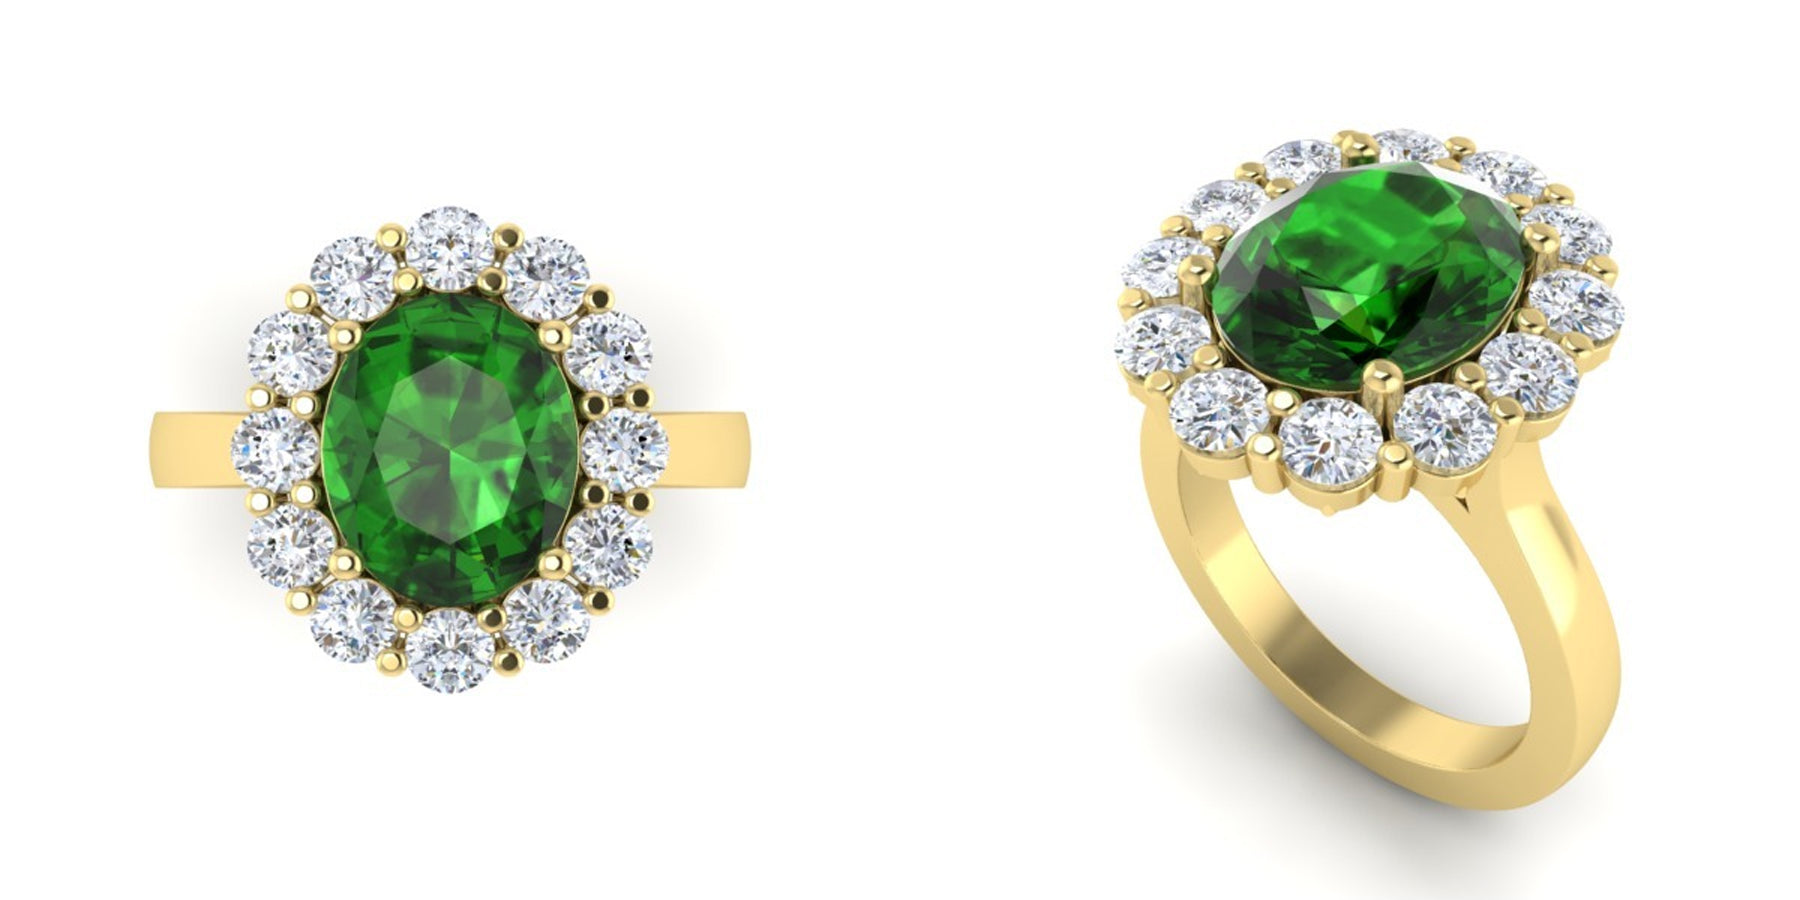 CAD of a Bespoke Green Sapphire oval cut Gemstone Cluster ring from Fenton made with 18k recycled yellow gold 